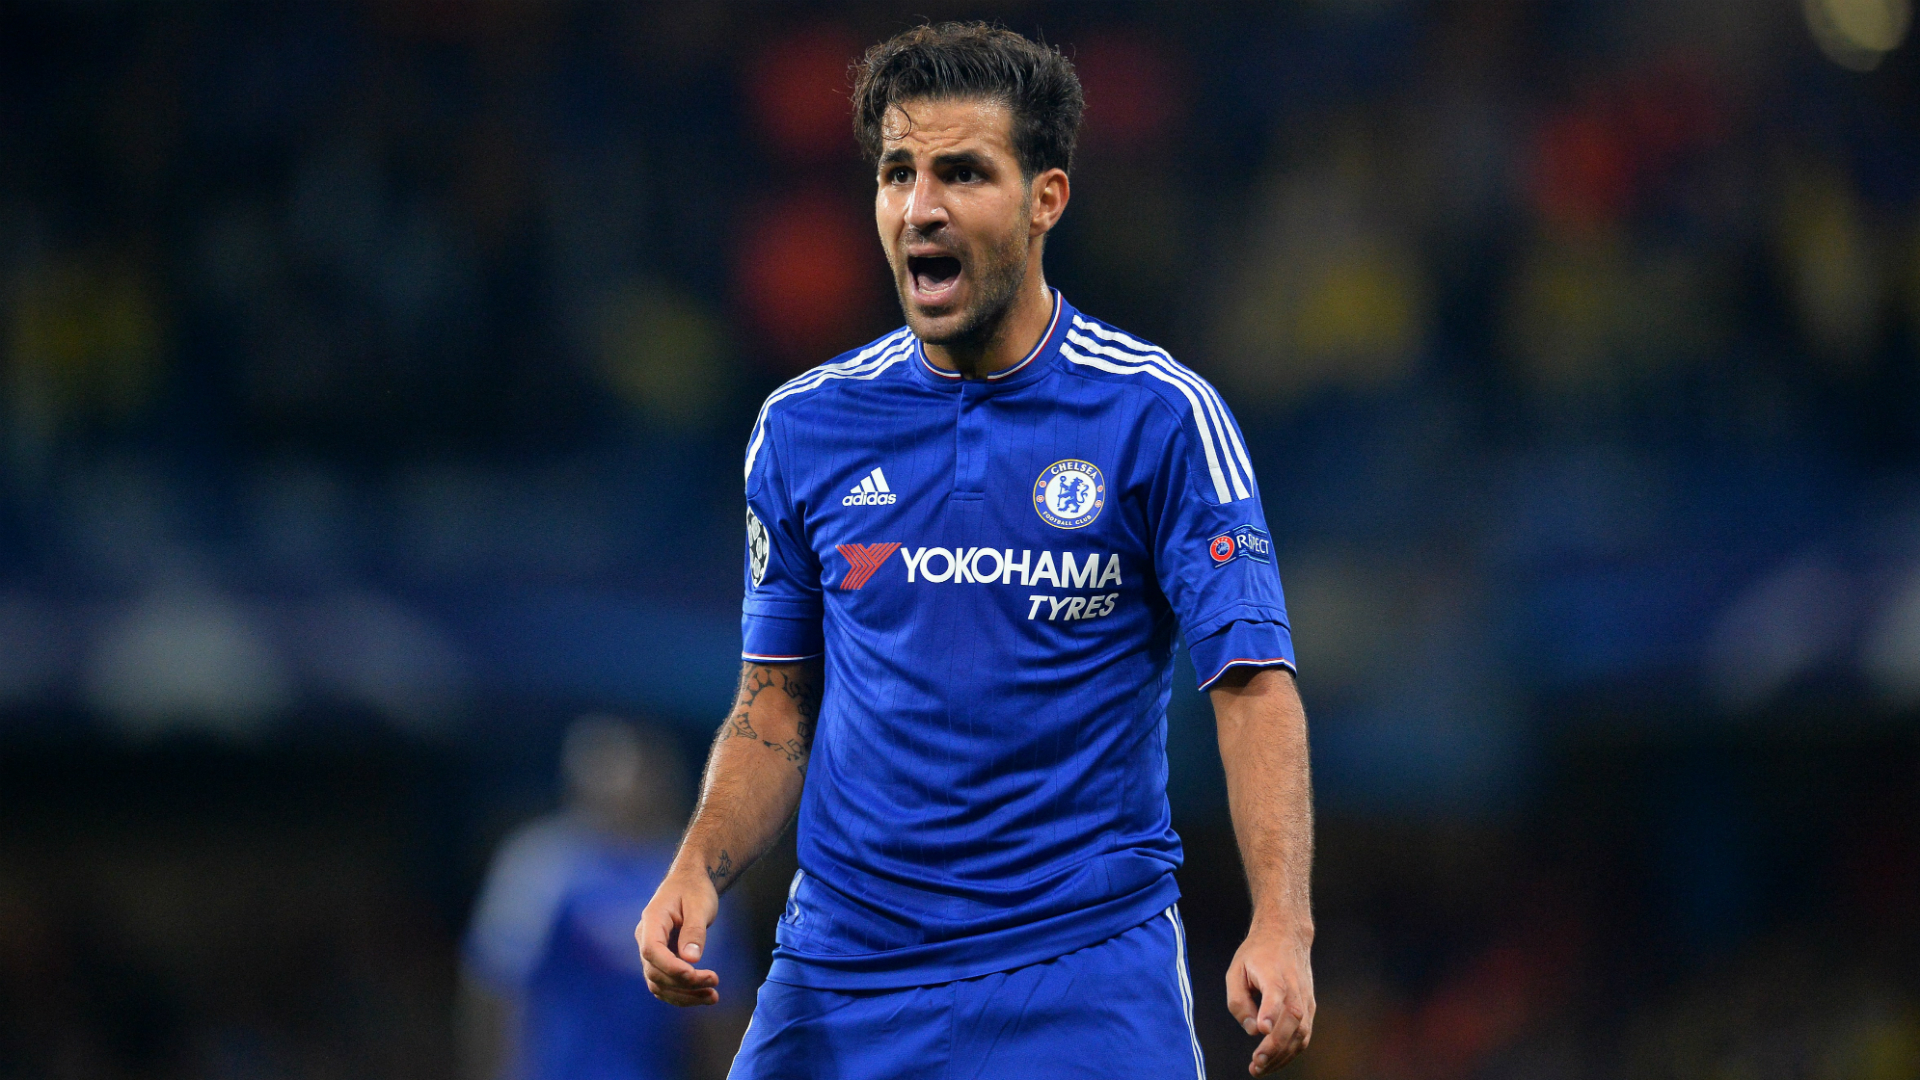 Former Chelsea man Cesc Fabregas lauds positive form of the club in recent weeks.